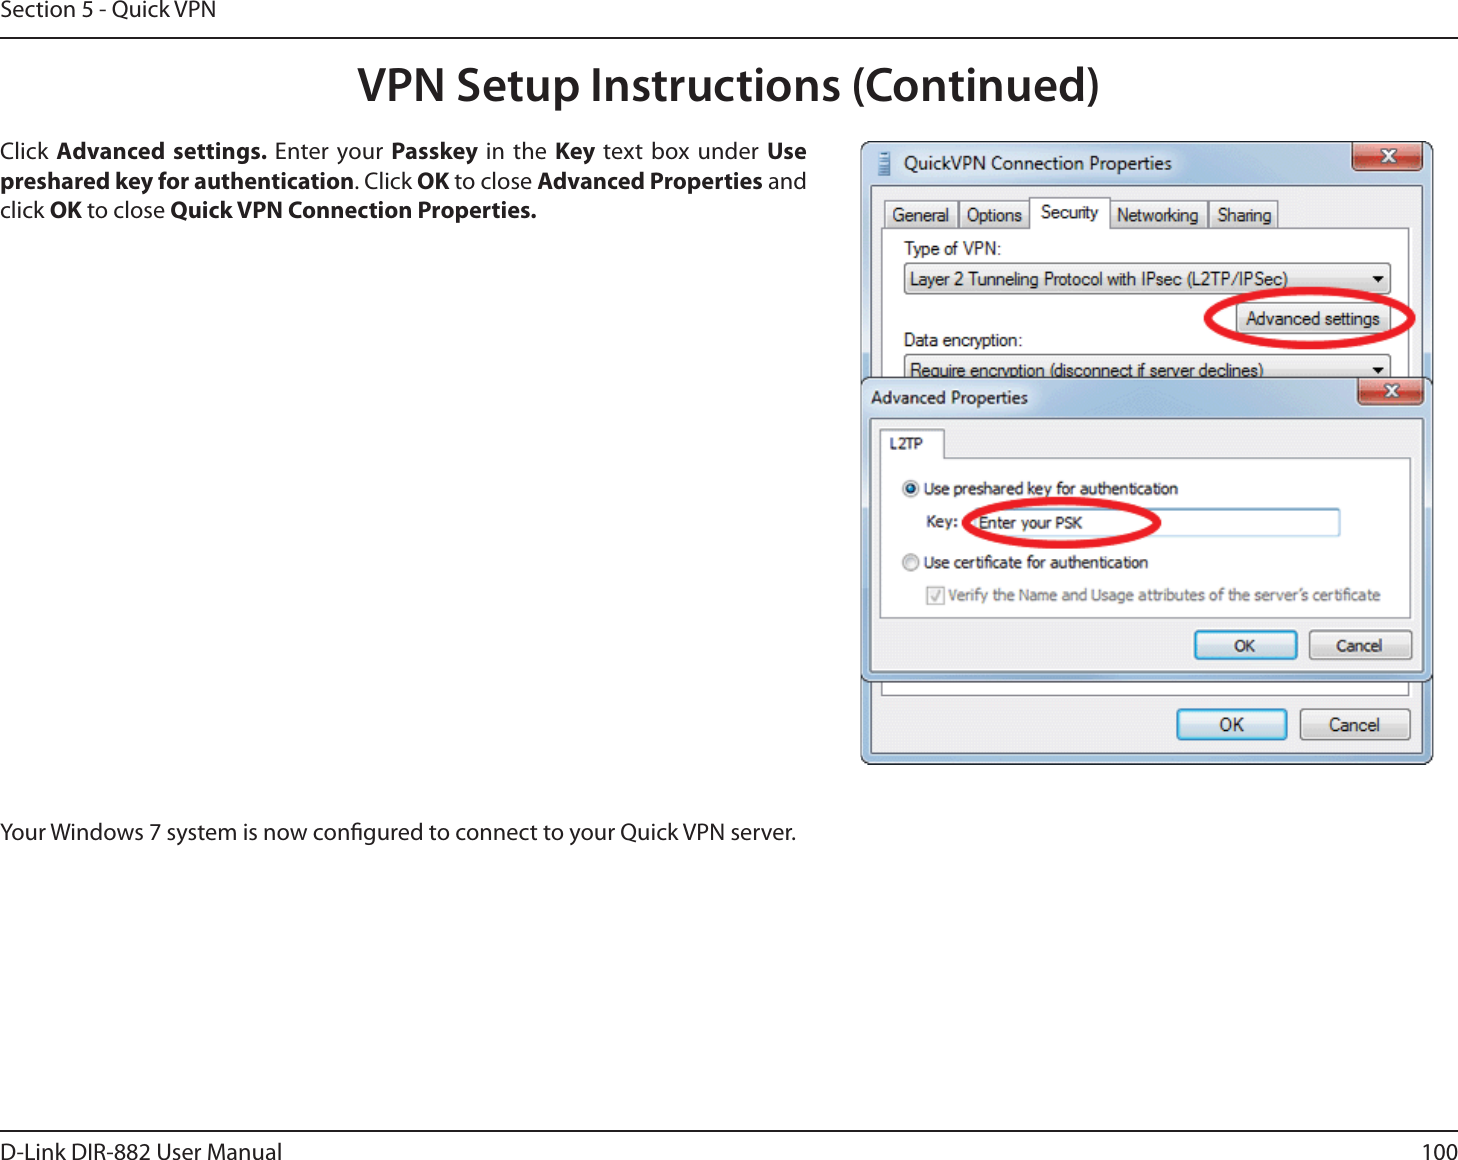 100D-Link DIR-882 User ManualSection 5 - Quick VPNYour Windows 7 system is now congured to connect to your Quick VPN server.Click &quot;EWBODFETFUUJOHTEnter your Passkey in the Key  text box under Use preshared key for authentication. Click OK to close &quot;EWBODFE1SPQFSUJFT and click OK to close Quick VPN Connection Properties.VPN Setup Instructions (Continued)